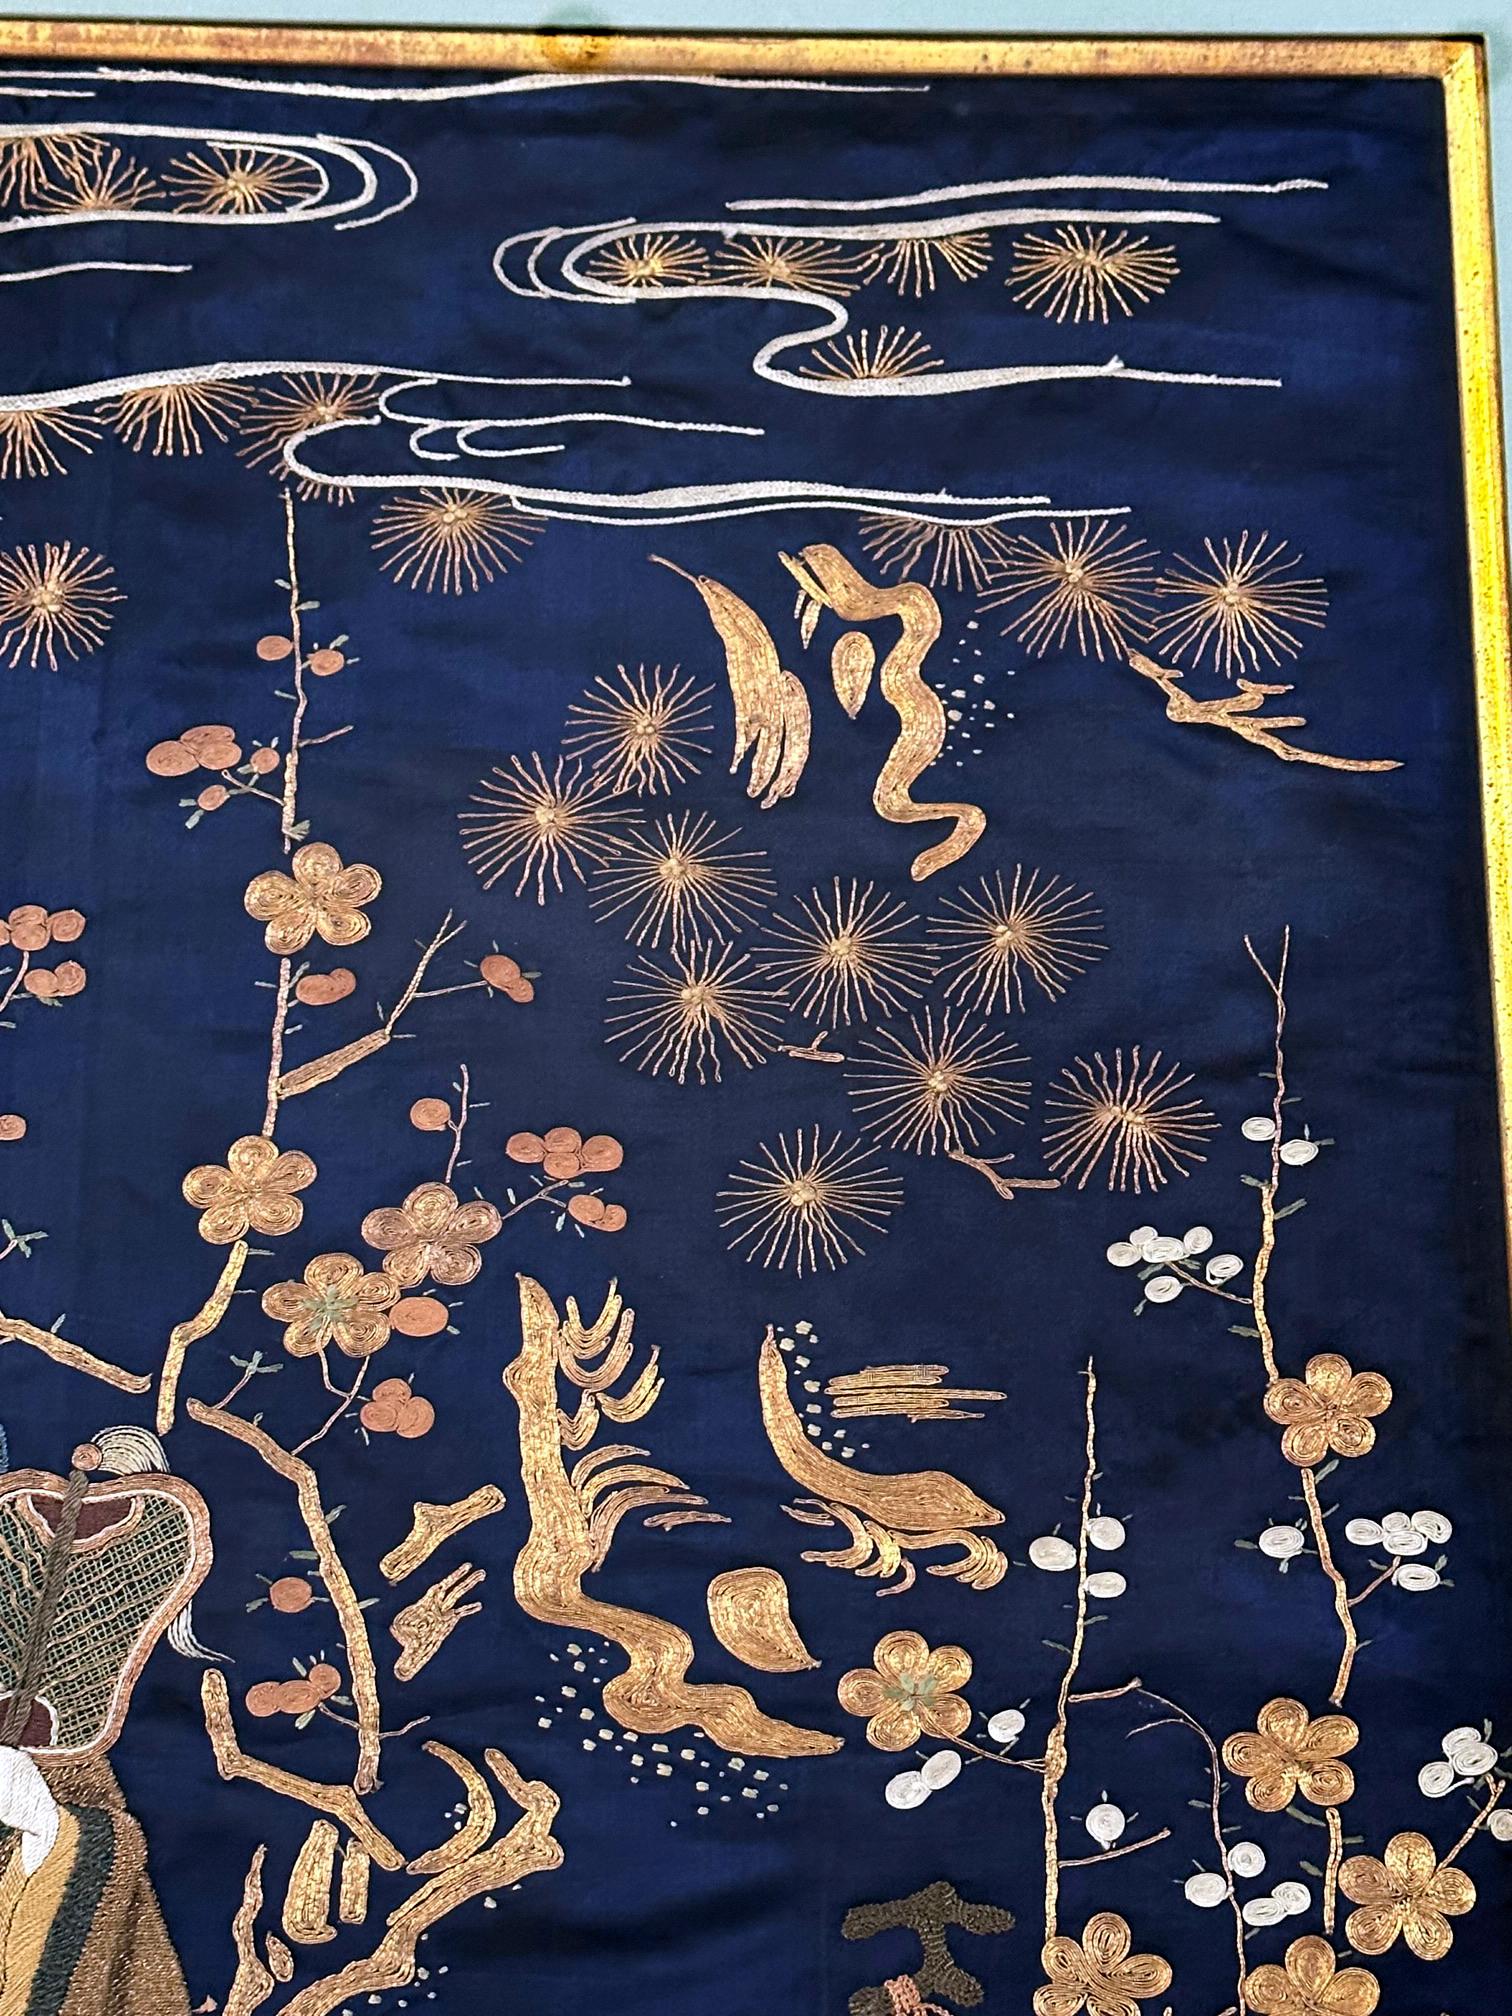 Framed Antique Japanese Embroidery Fukusa Panel  In Good Condition For Sale In Atlanta, GA